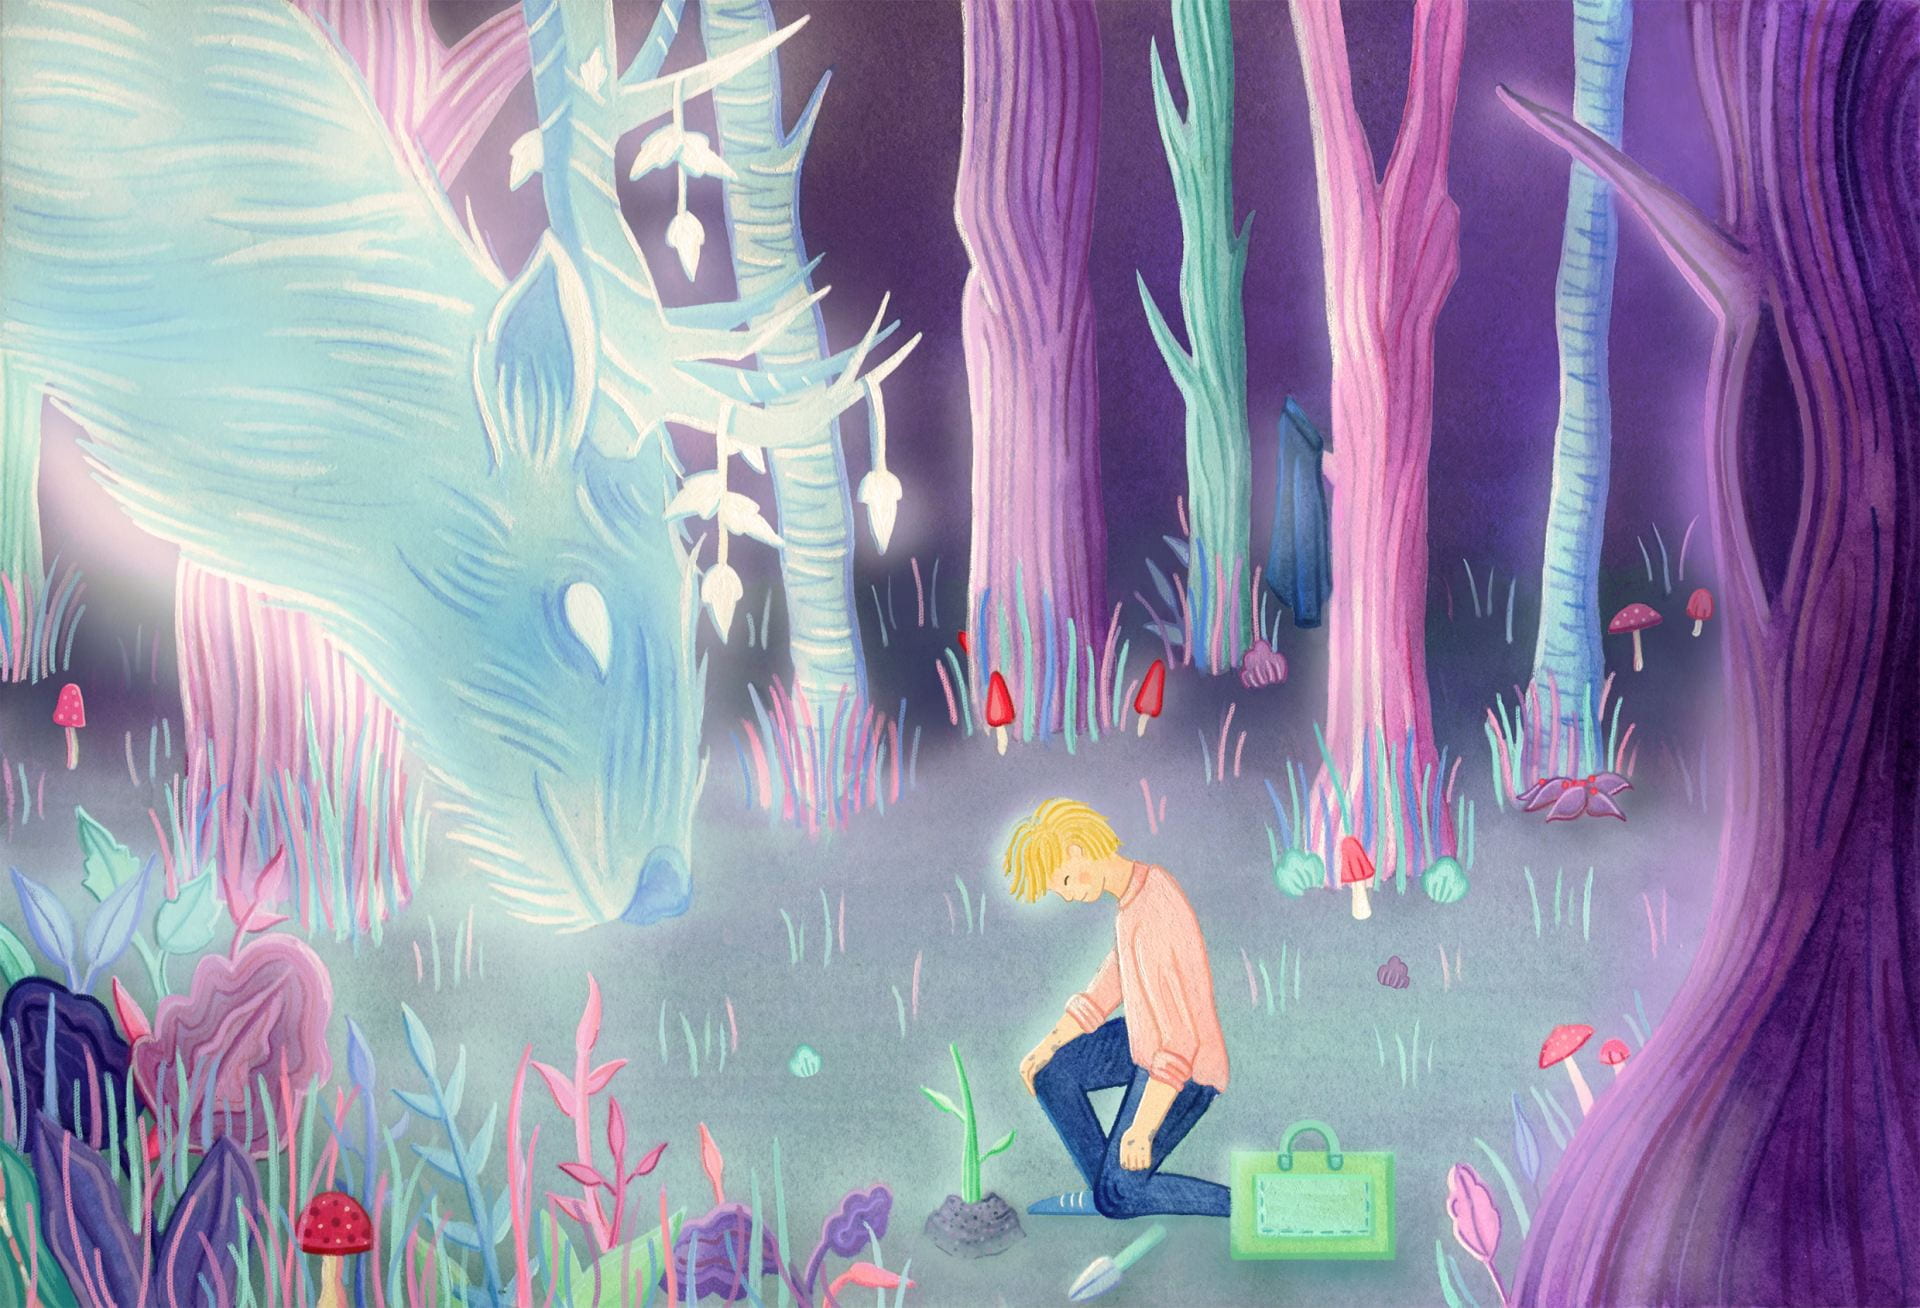 Painting of a nighttime wooded area, with a person planting a tree before a glowing, supernal deer.